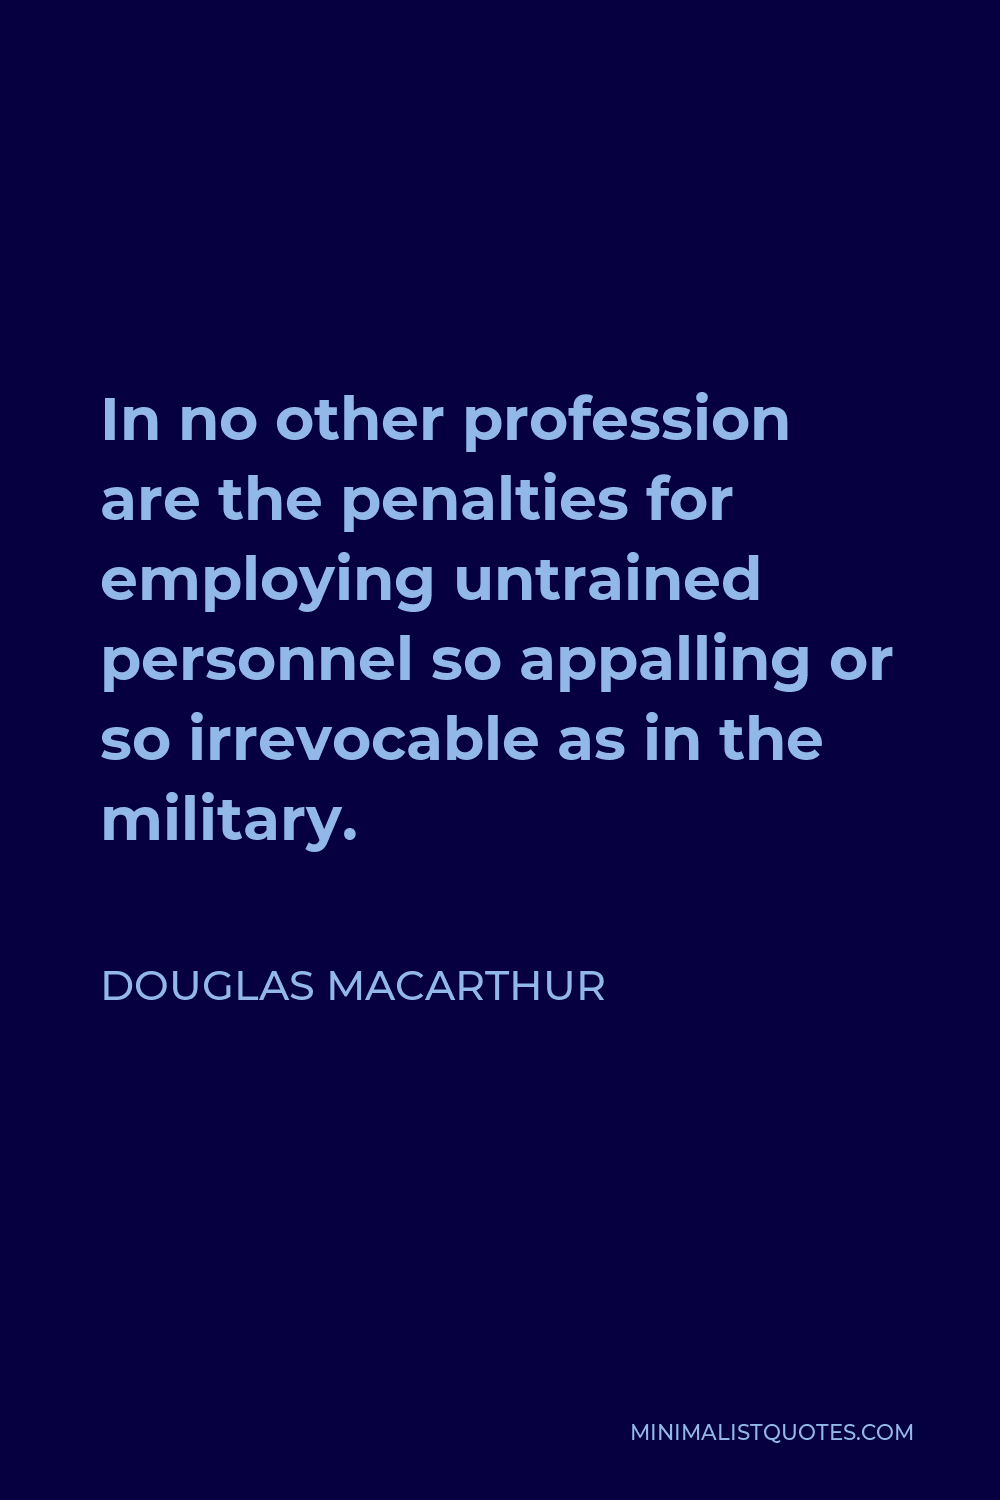 Douglas MacArthur Quote - In no other profession are the penalties for employing untrained personnel so appalling or so irrevocable as in the military.